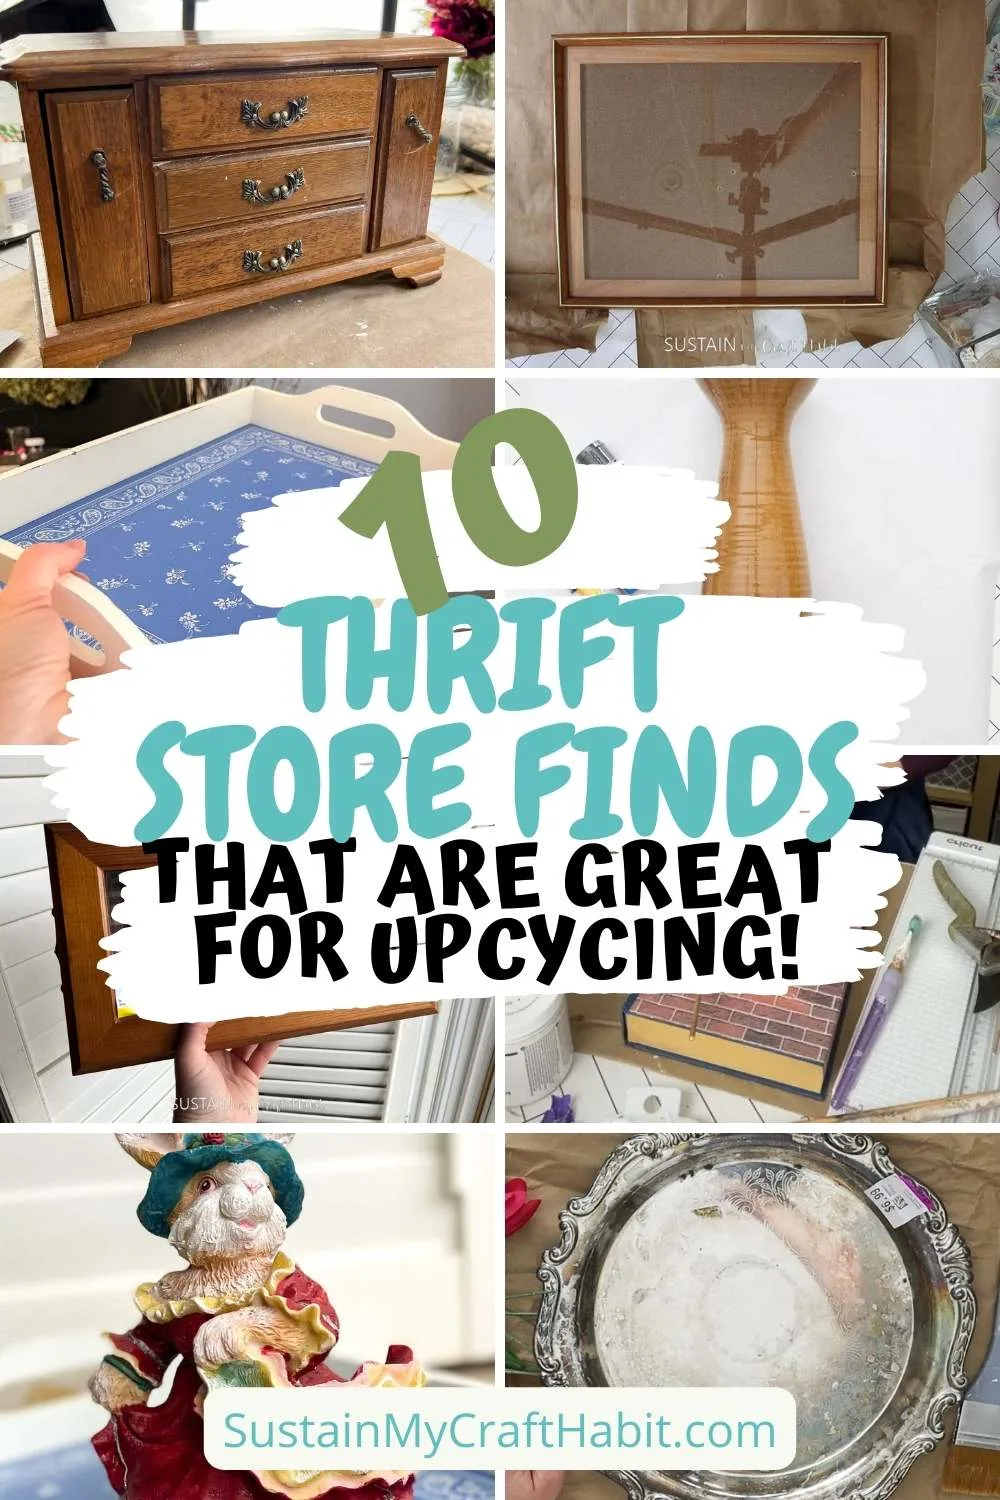 Collage of thrift store finds to upcycle including a jewelry box, frame, tray, silver platter and more.